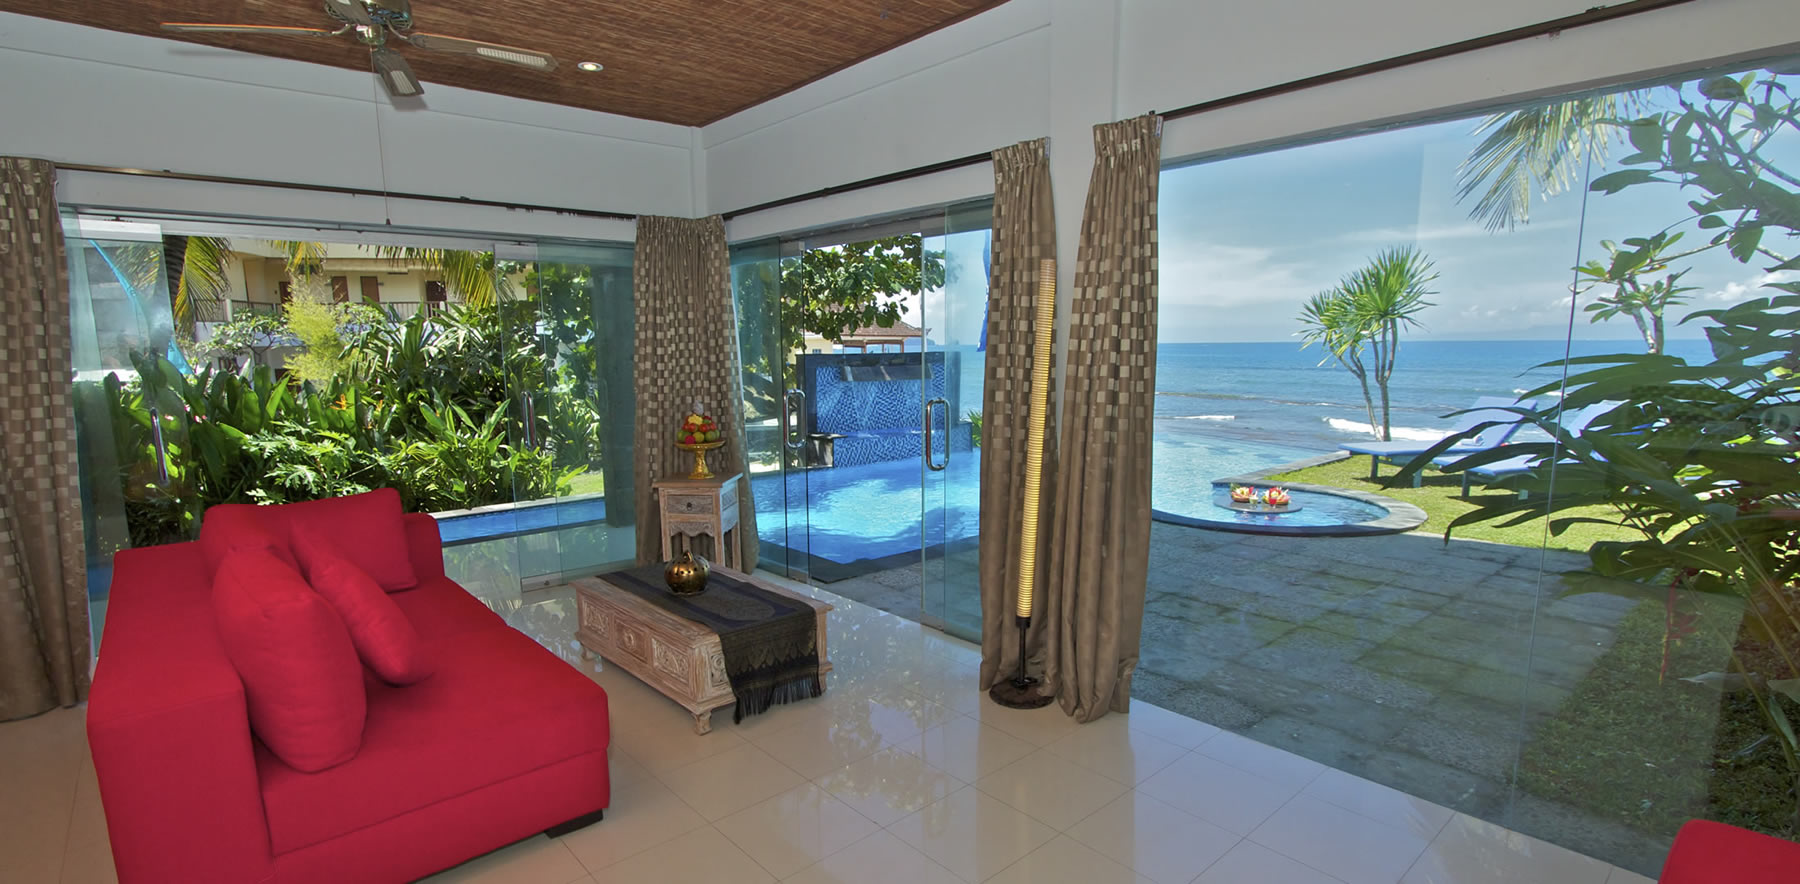 Candidasa-place to stay when coming to bali for the first time